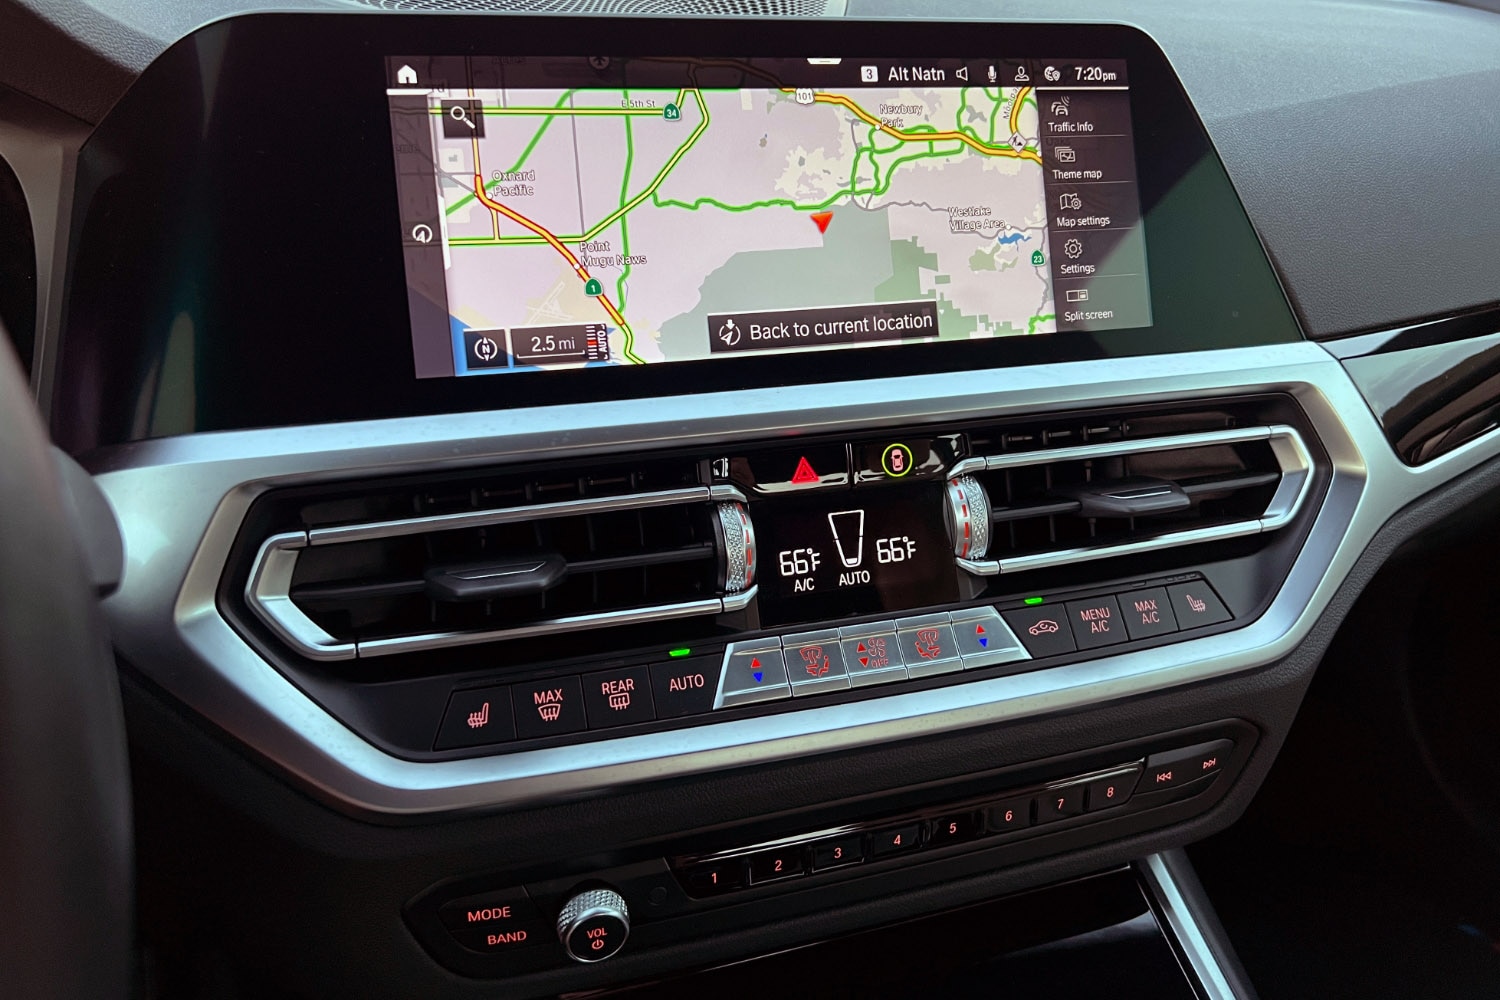 2022 BMW 2 Series Coupe infotainment system